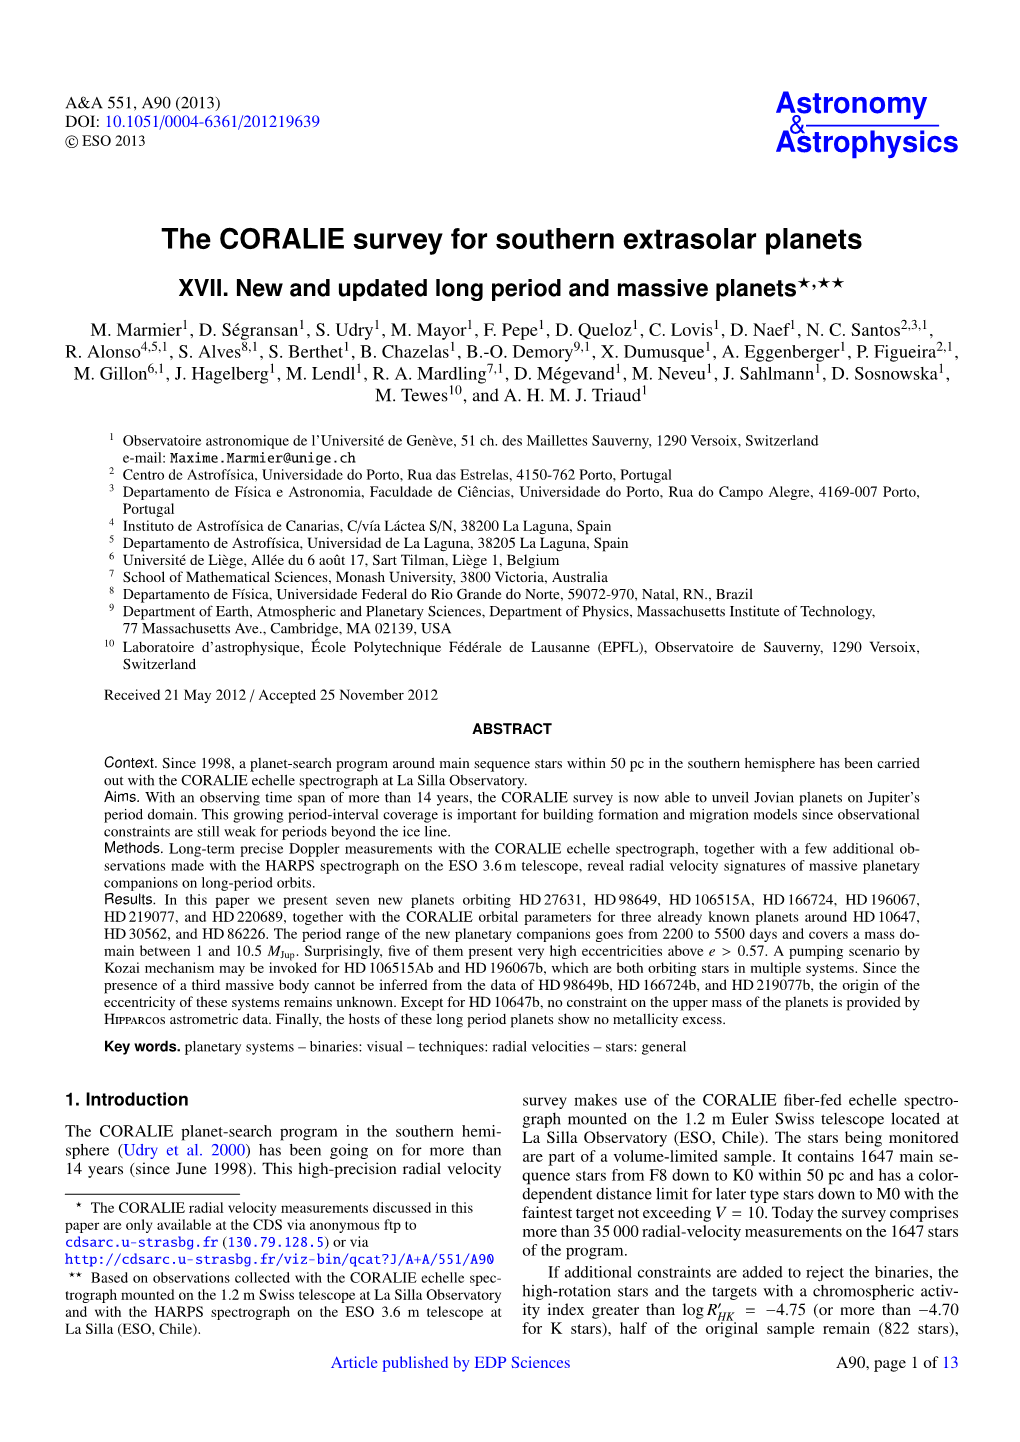 The CORALIE Survey for Southern Extrasolar Planets XVII